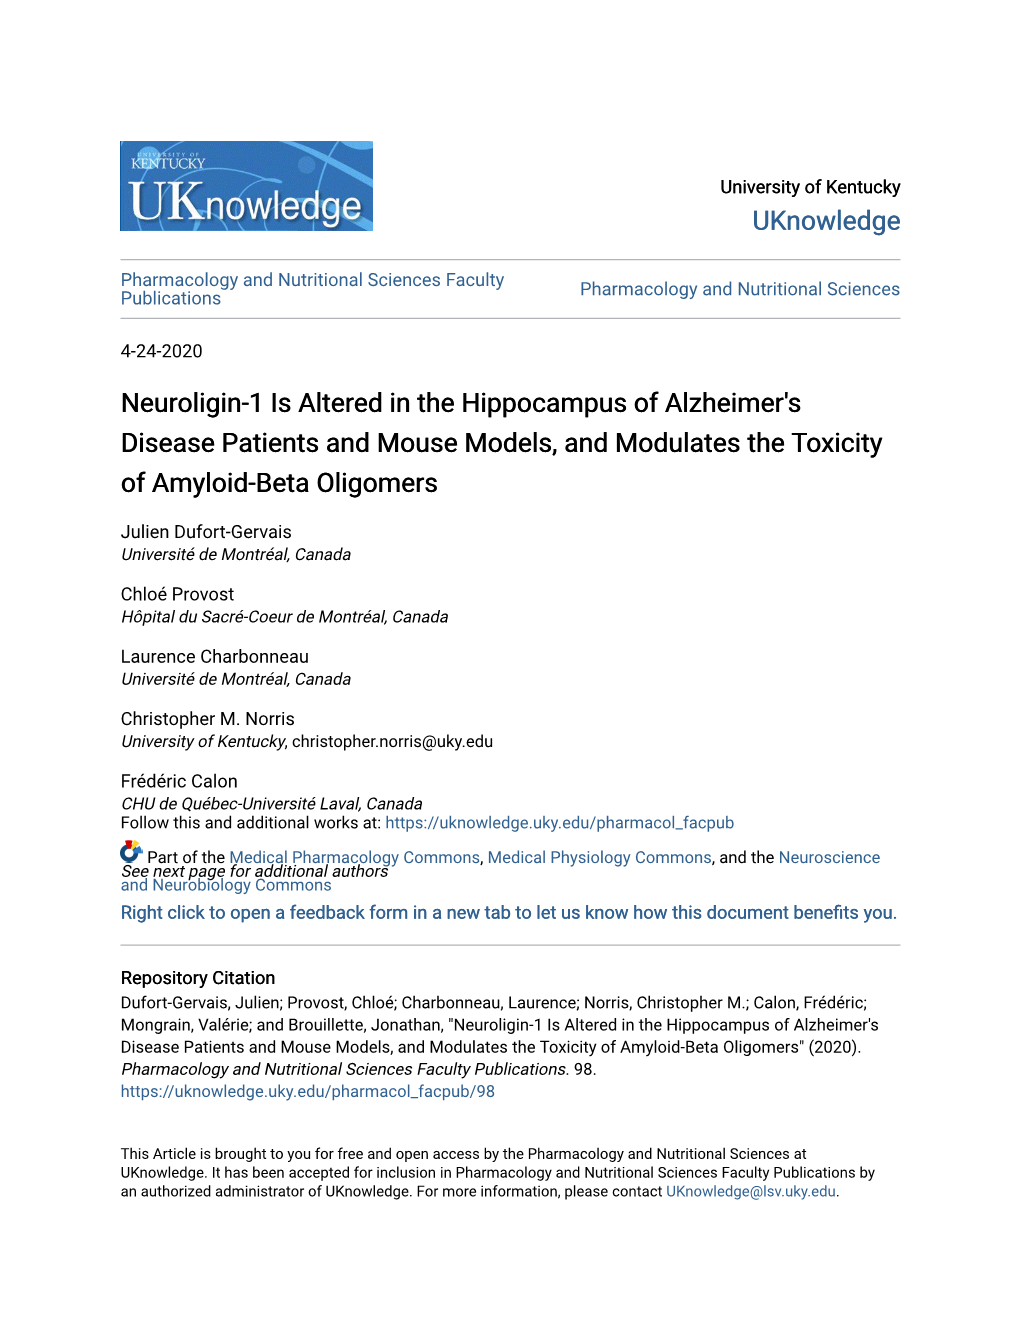 Neuroligin-1 Is Altered in the Hippocampus of Alzheimer's Disease Patients and Mouse Models, and Modulates the Toxicity of Amyloid-Beta Oligomers